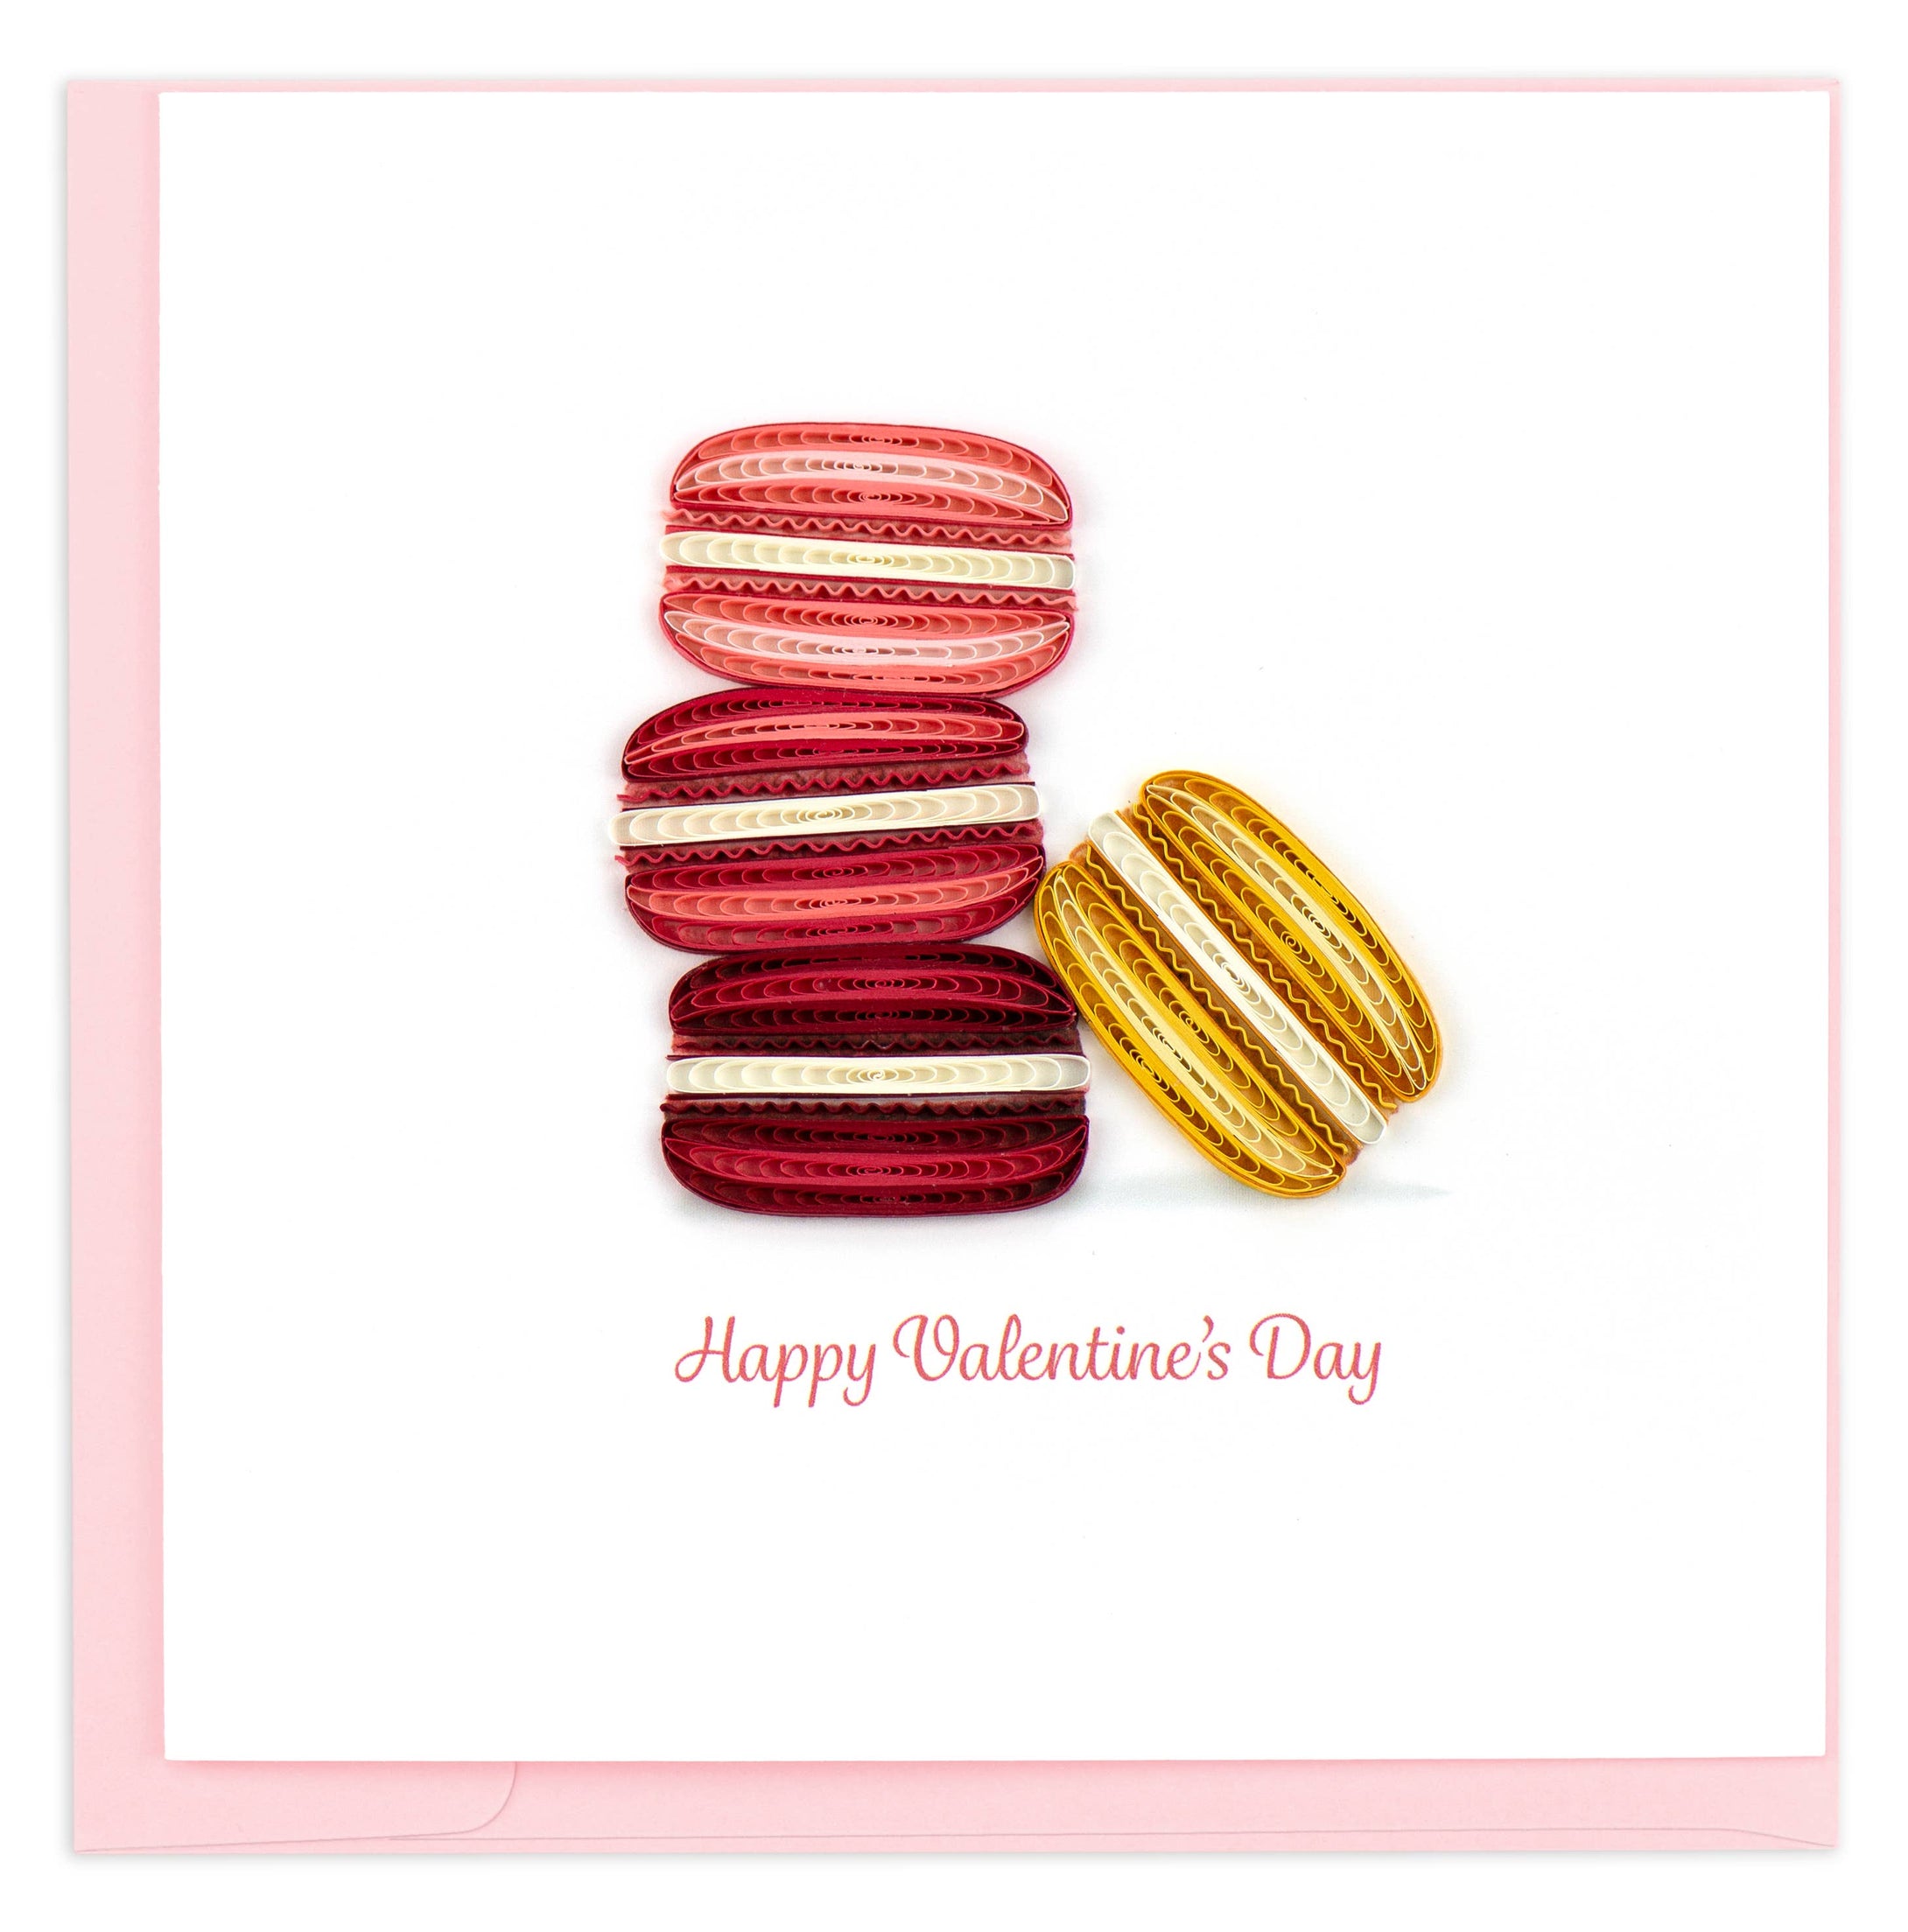 NIQUEA.D Quilled Macarons Valentine's Day Card